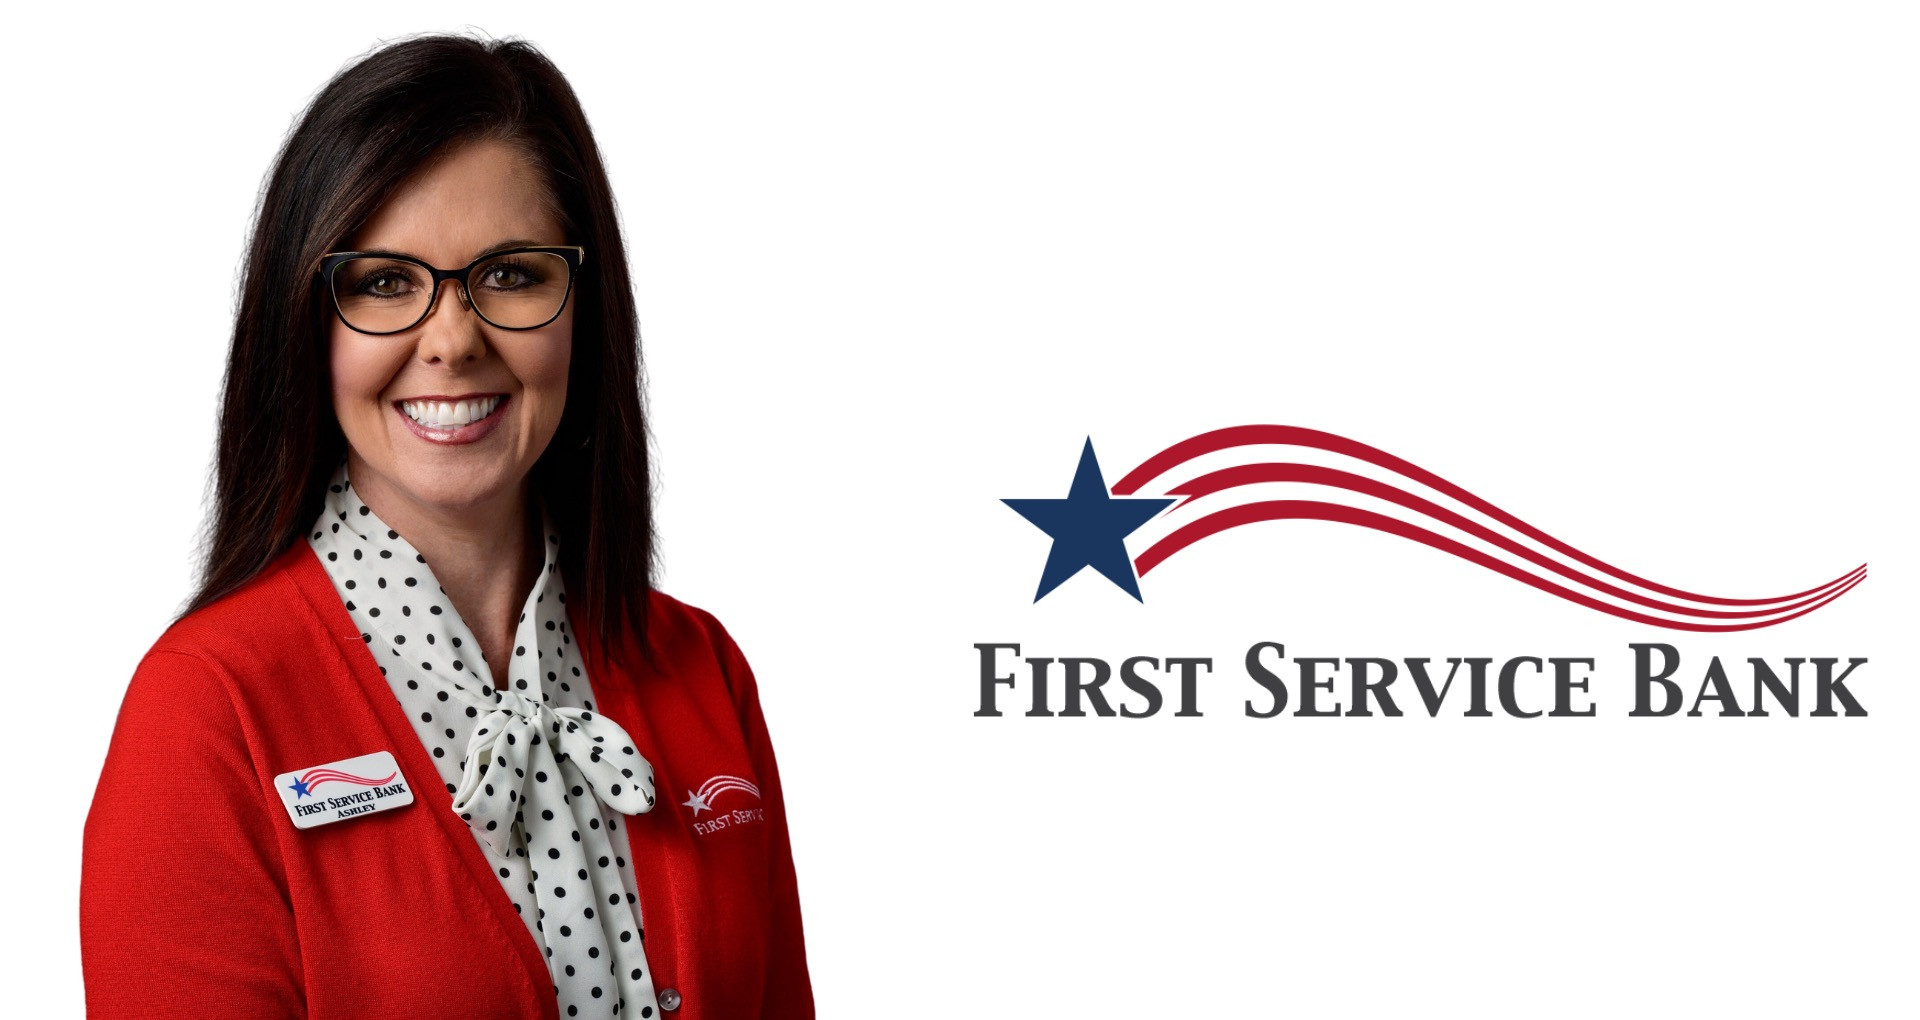 First Service Bank names Moore marketing manager